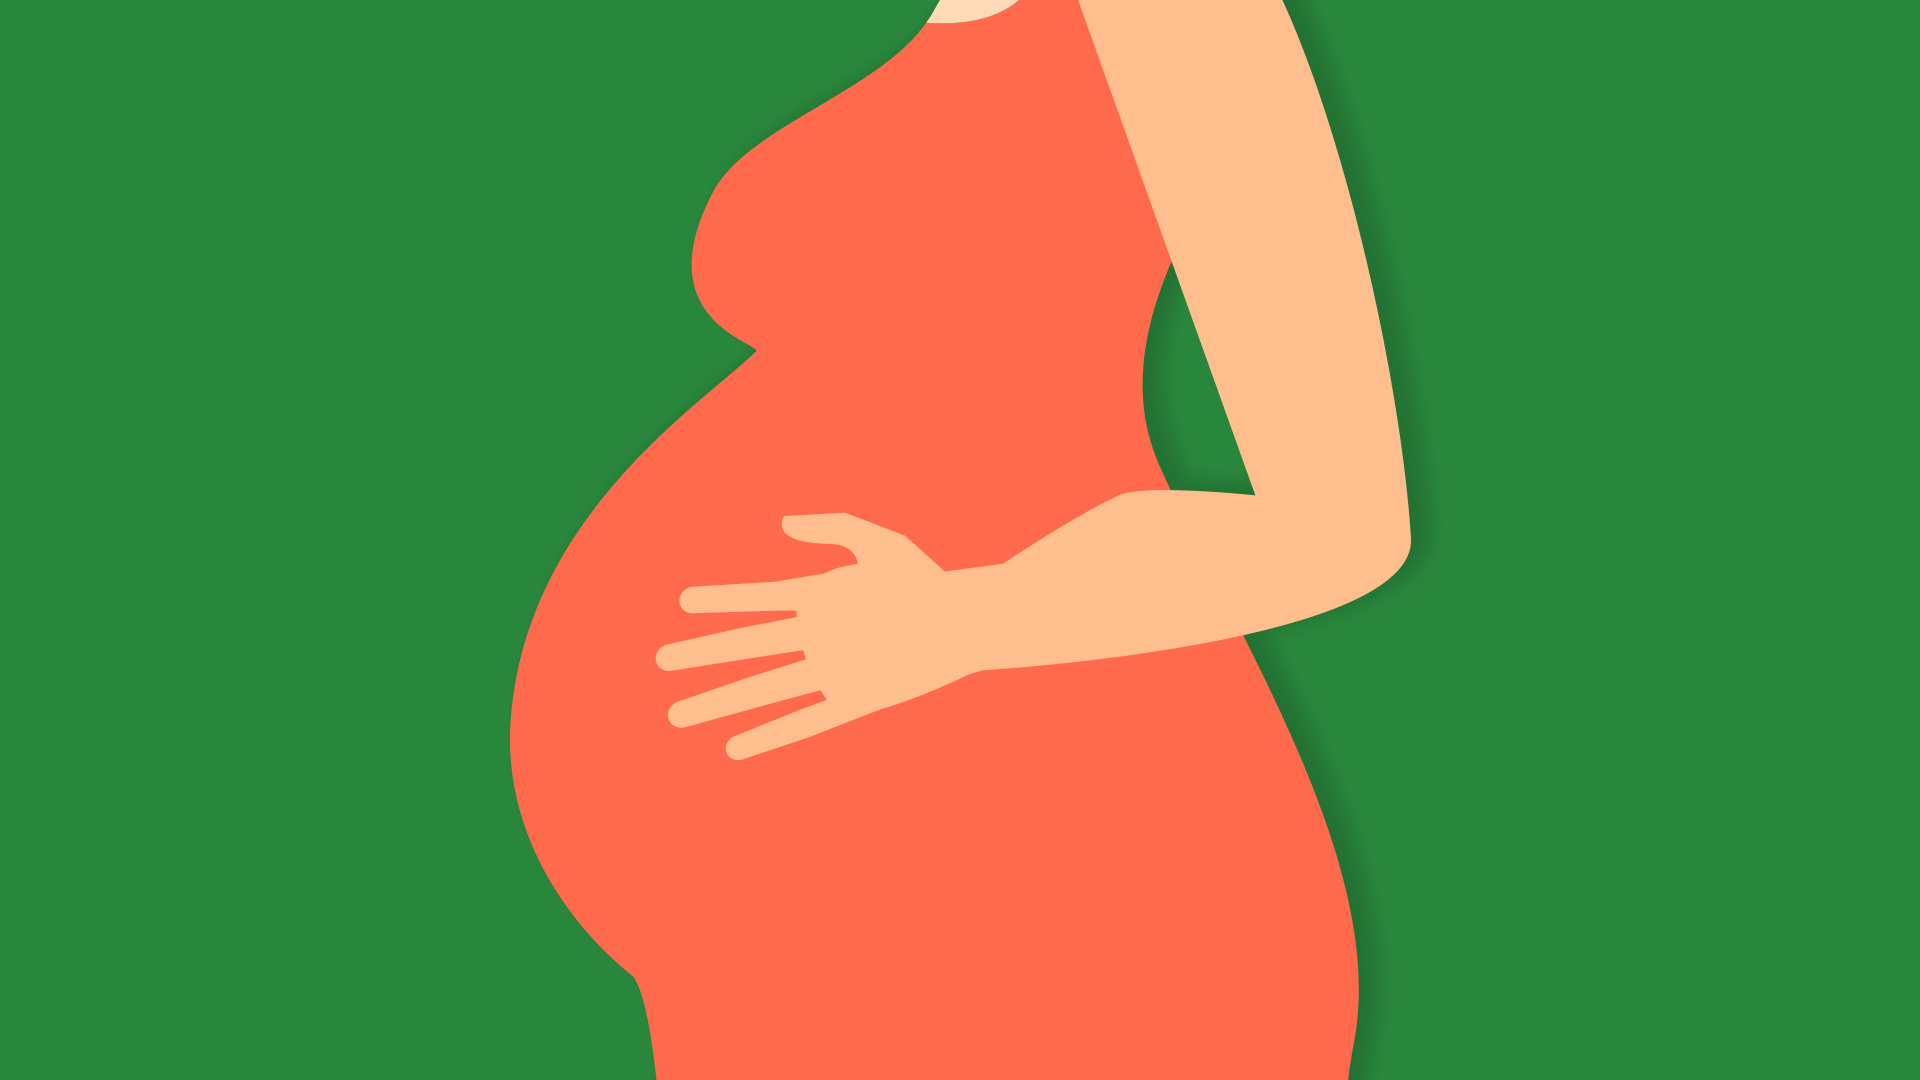 Pregnancy ages women, but effects reverse after delivery